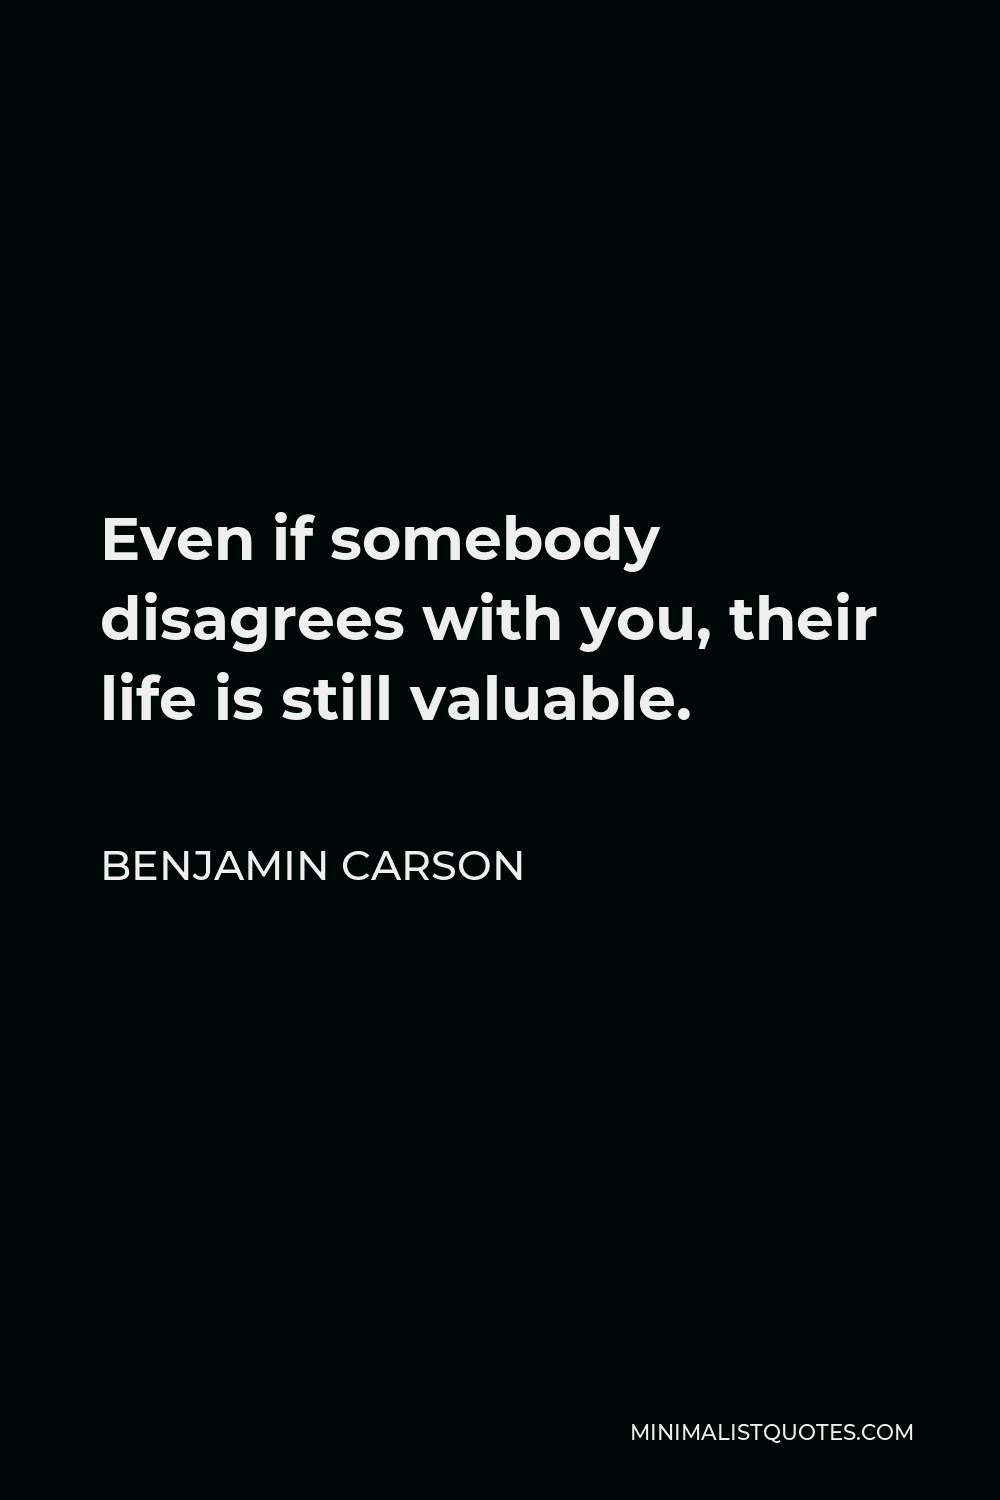 Benjamin Carson Quote - Even if somebody disagrees with you, their life is still valuable.